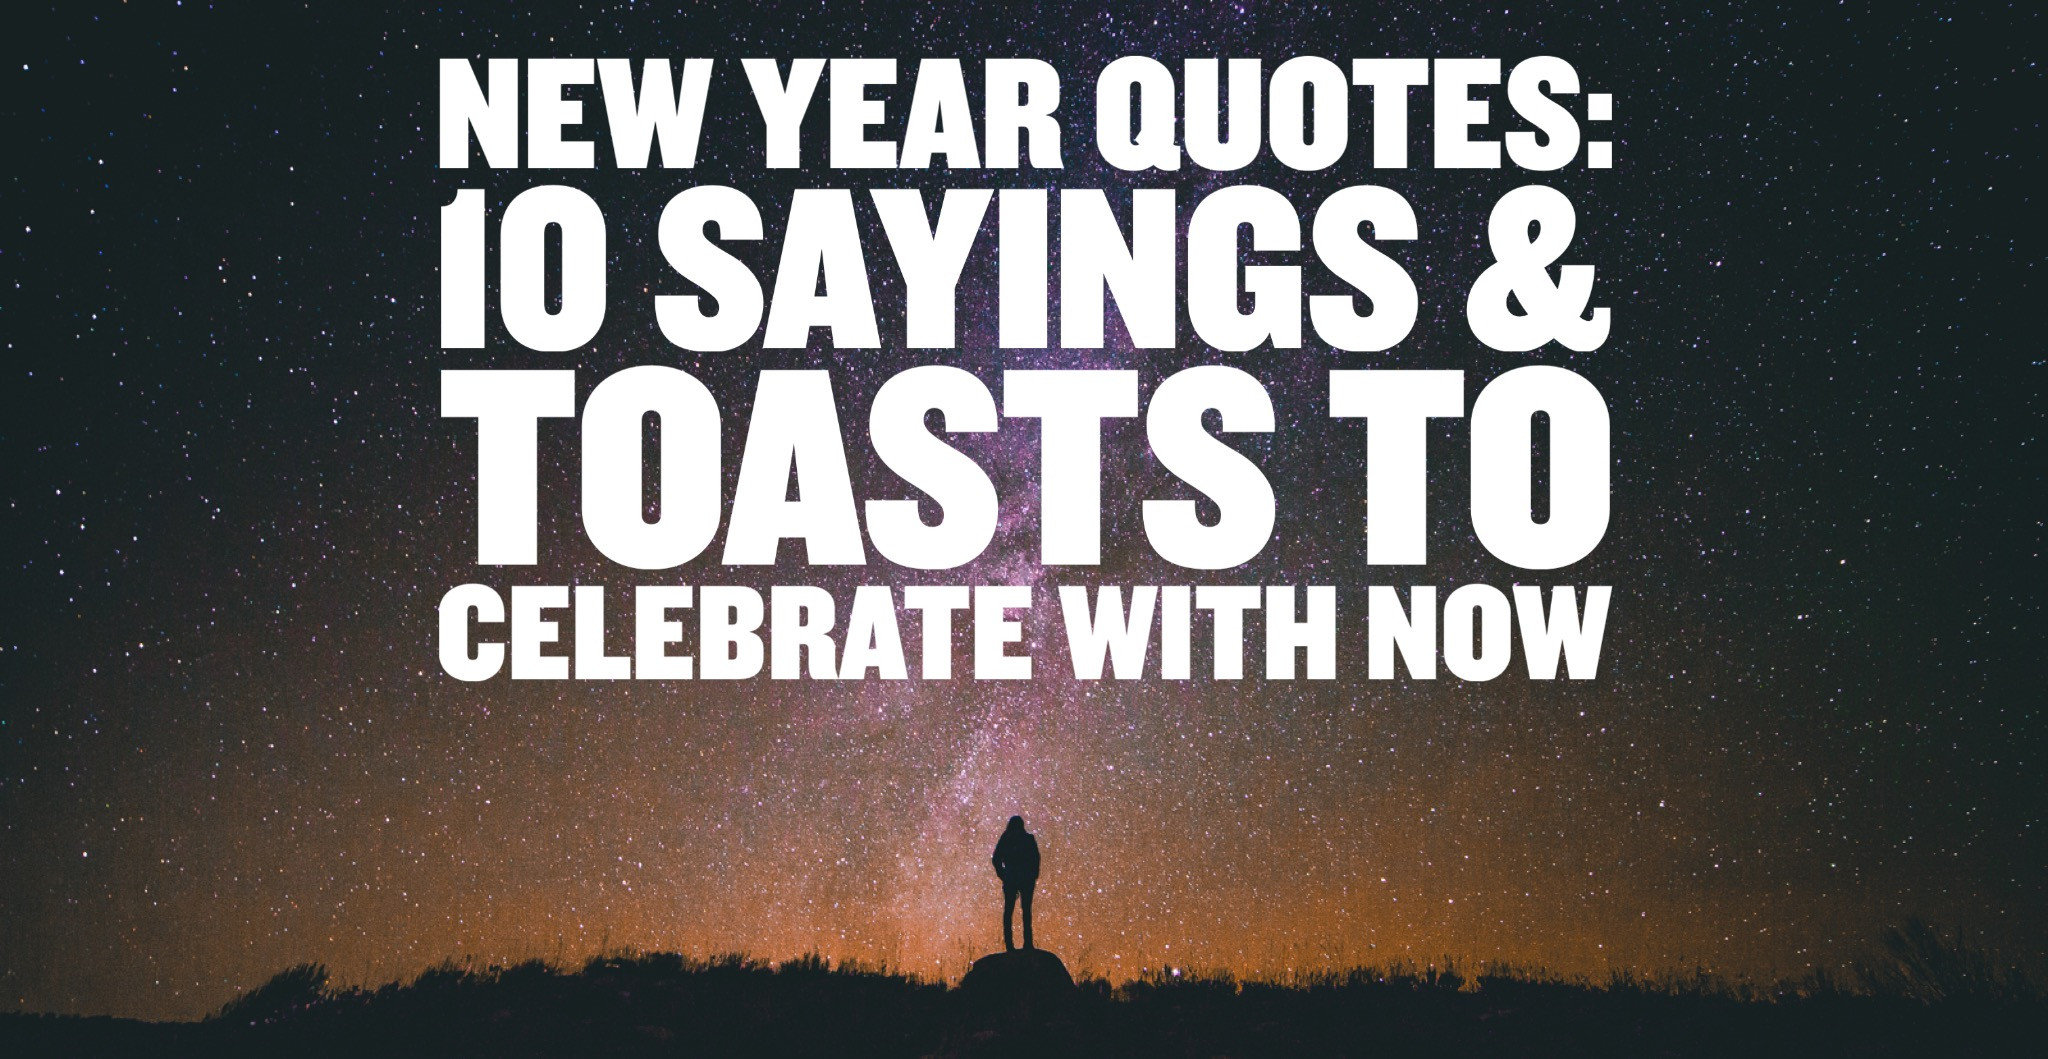 New Year Day Quotes
 New Year Quotes 10 Sayings & Toasts To Celebrate With